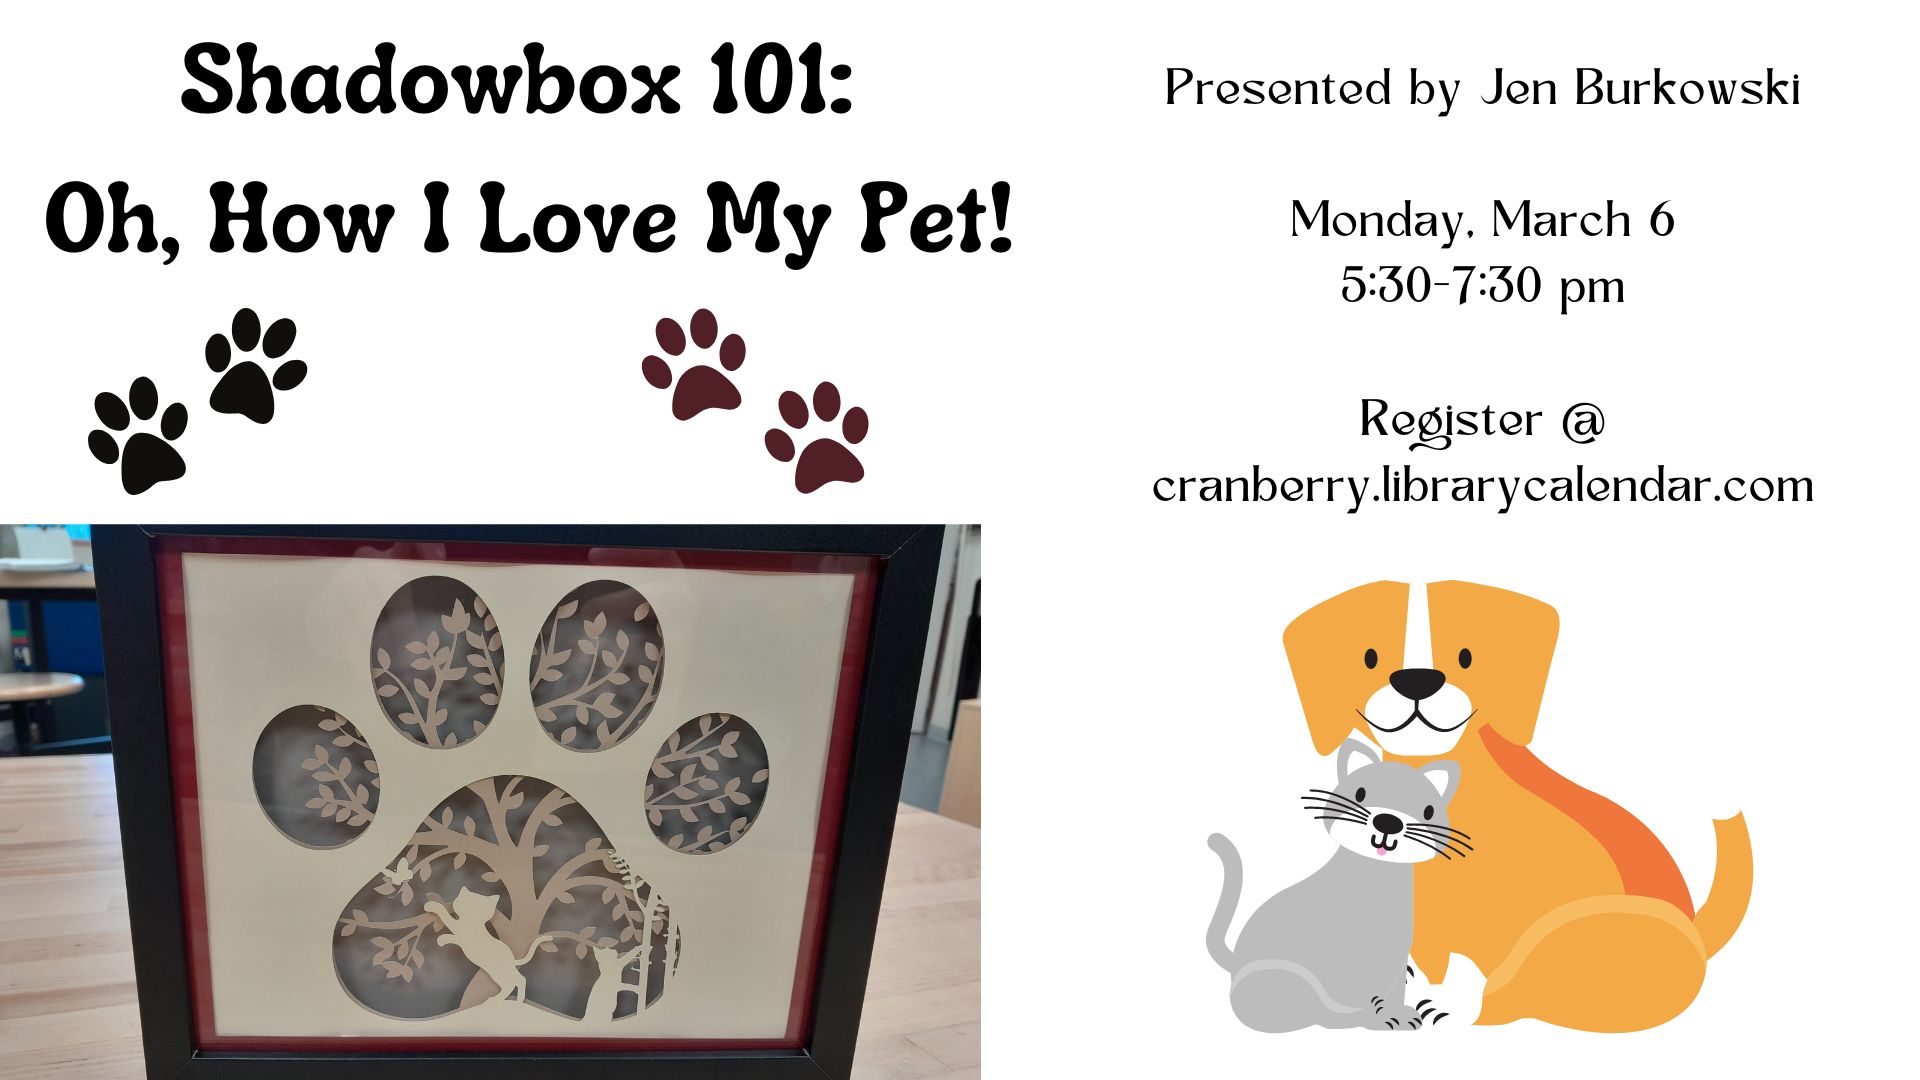 Flyer with an image of a pawprint shadowbox